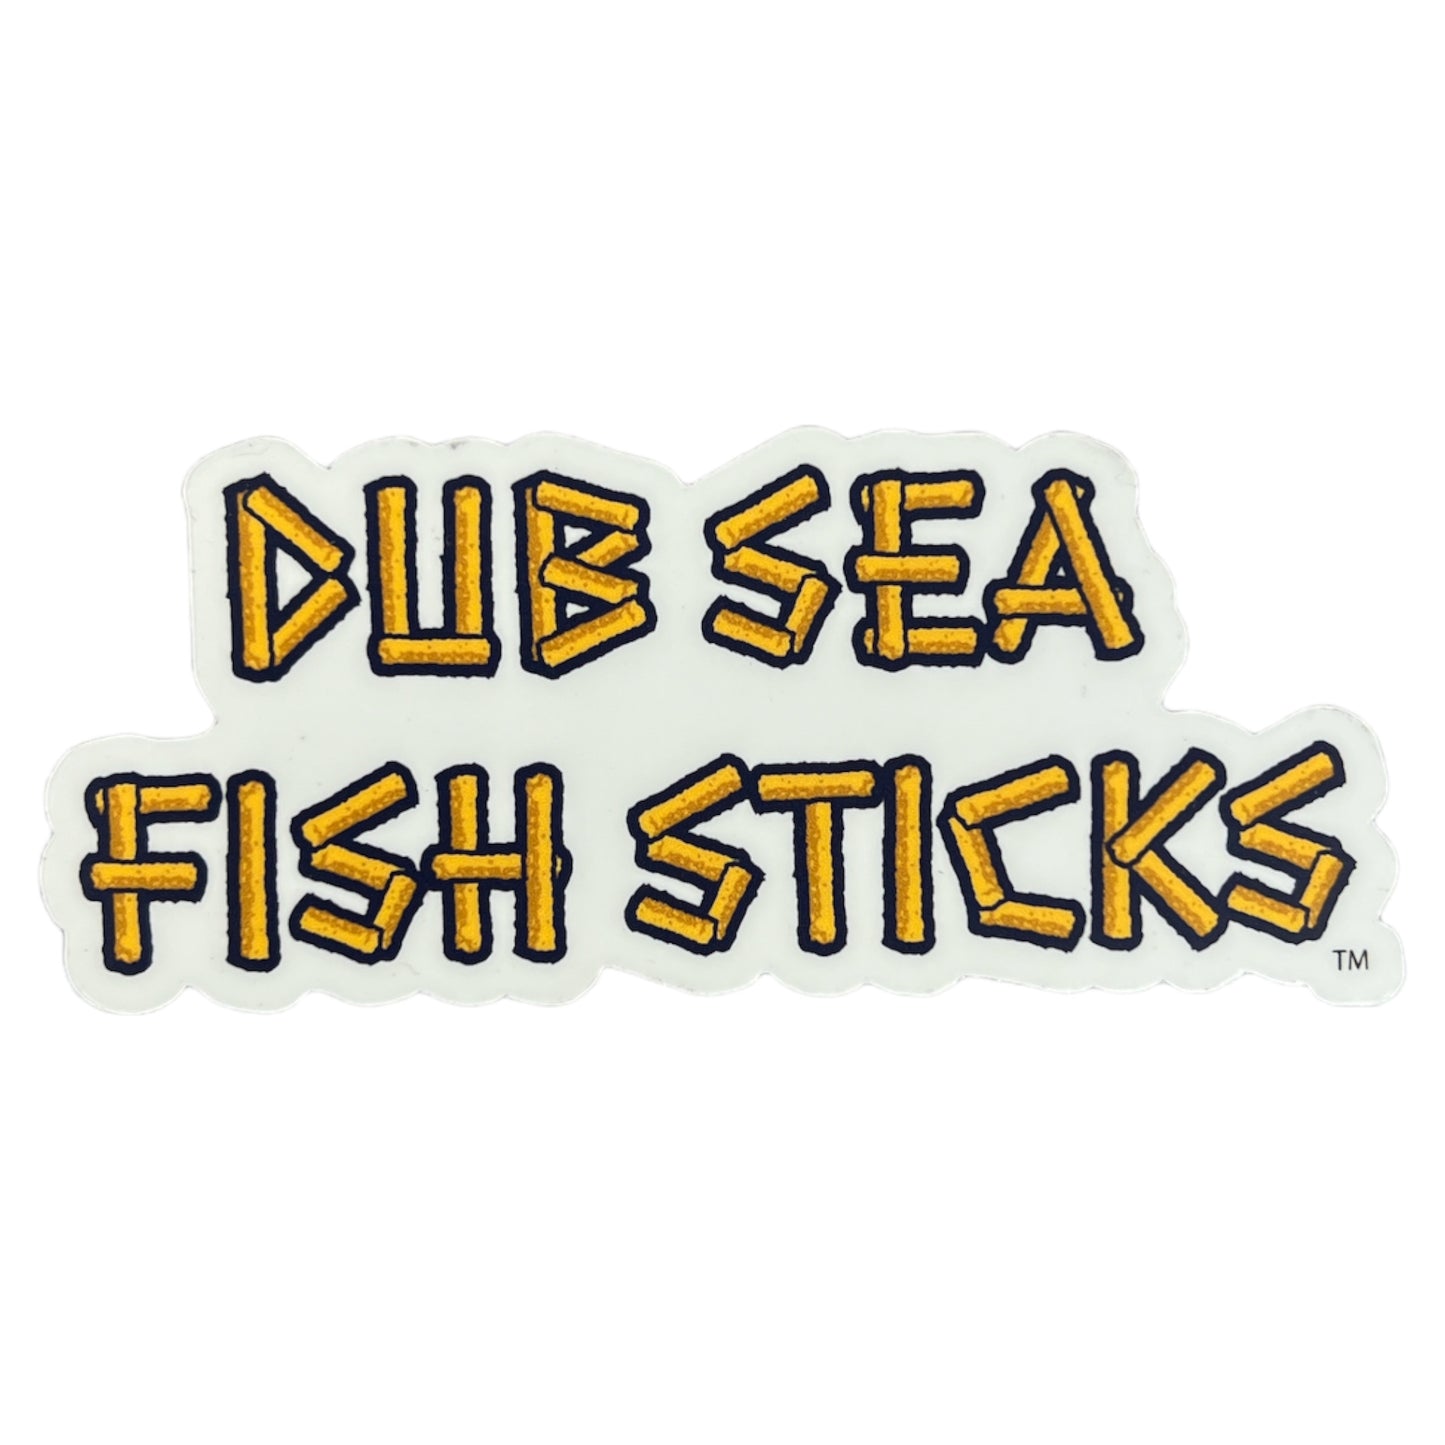 6_Sticker_Pack_Crispy_Frozen_Ice_Cube_Circle_Holographic_The_Fryer_Dubsea_Fish_Sticks_Word_Stickers